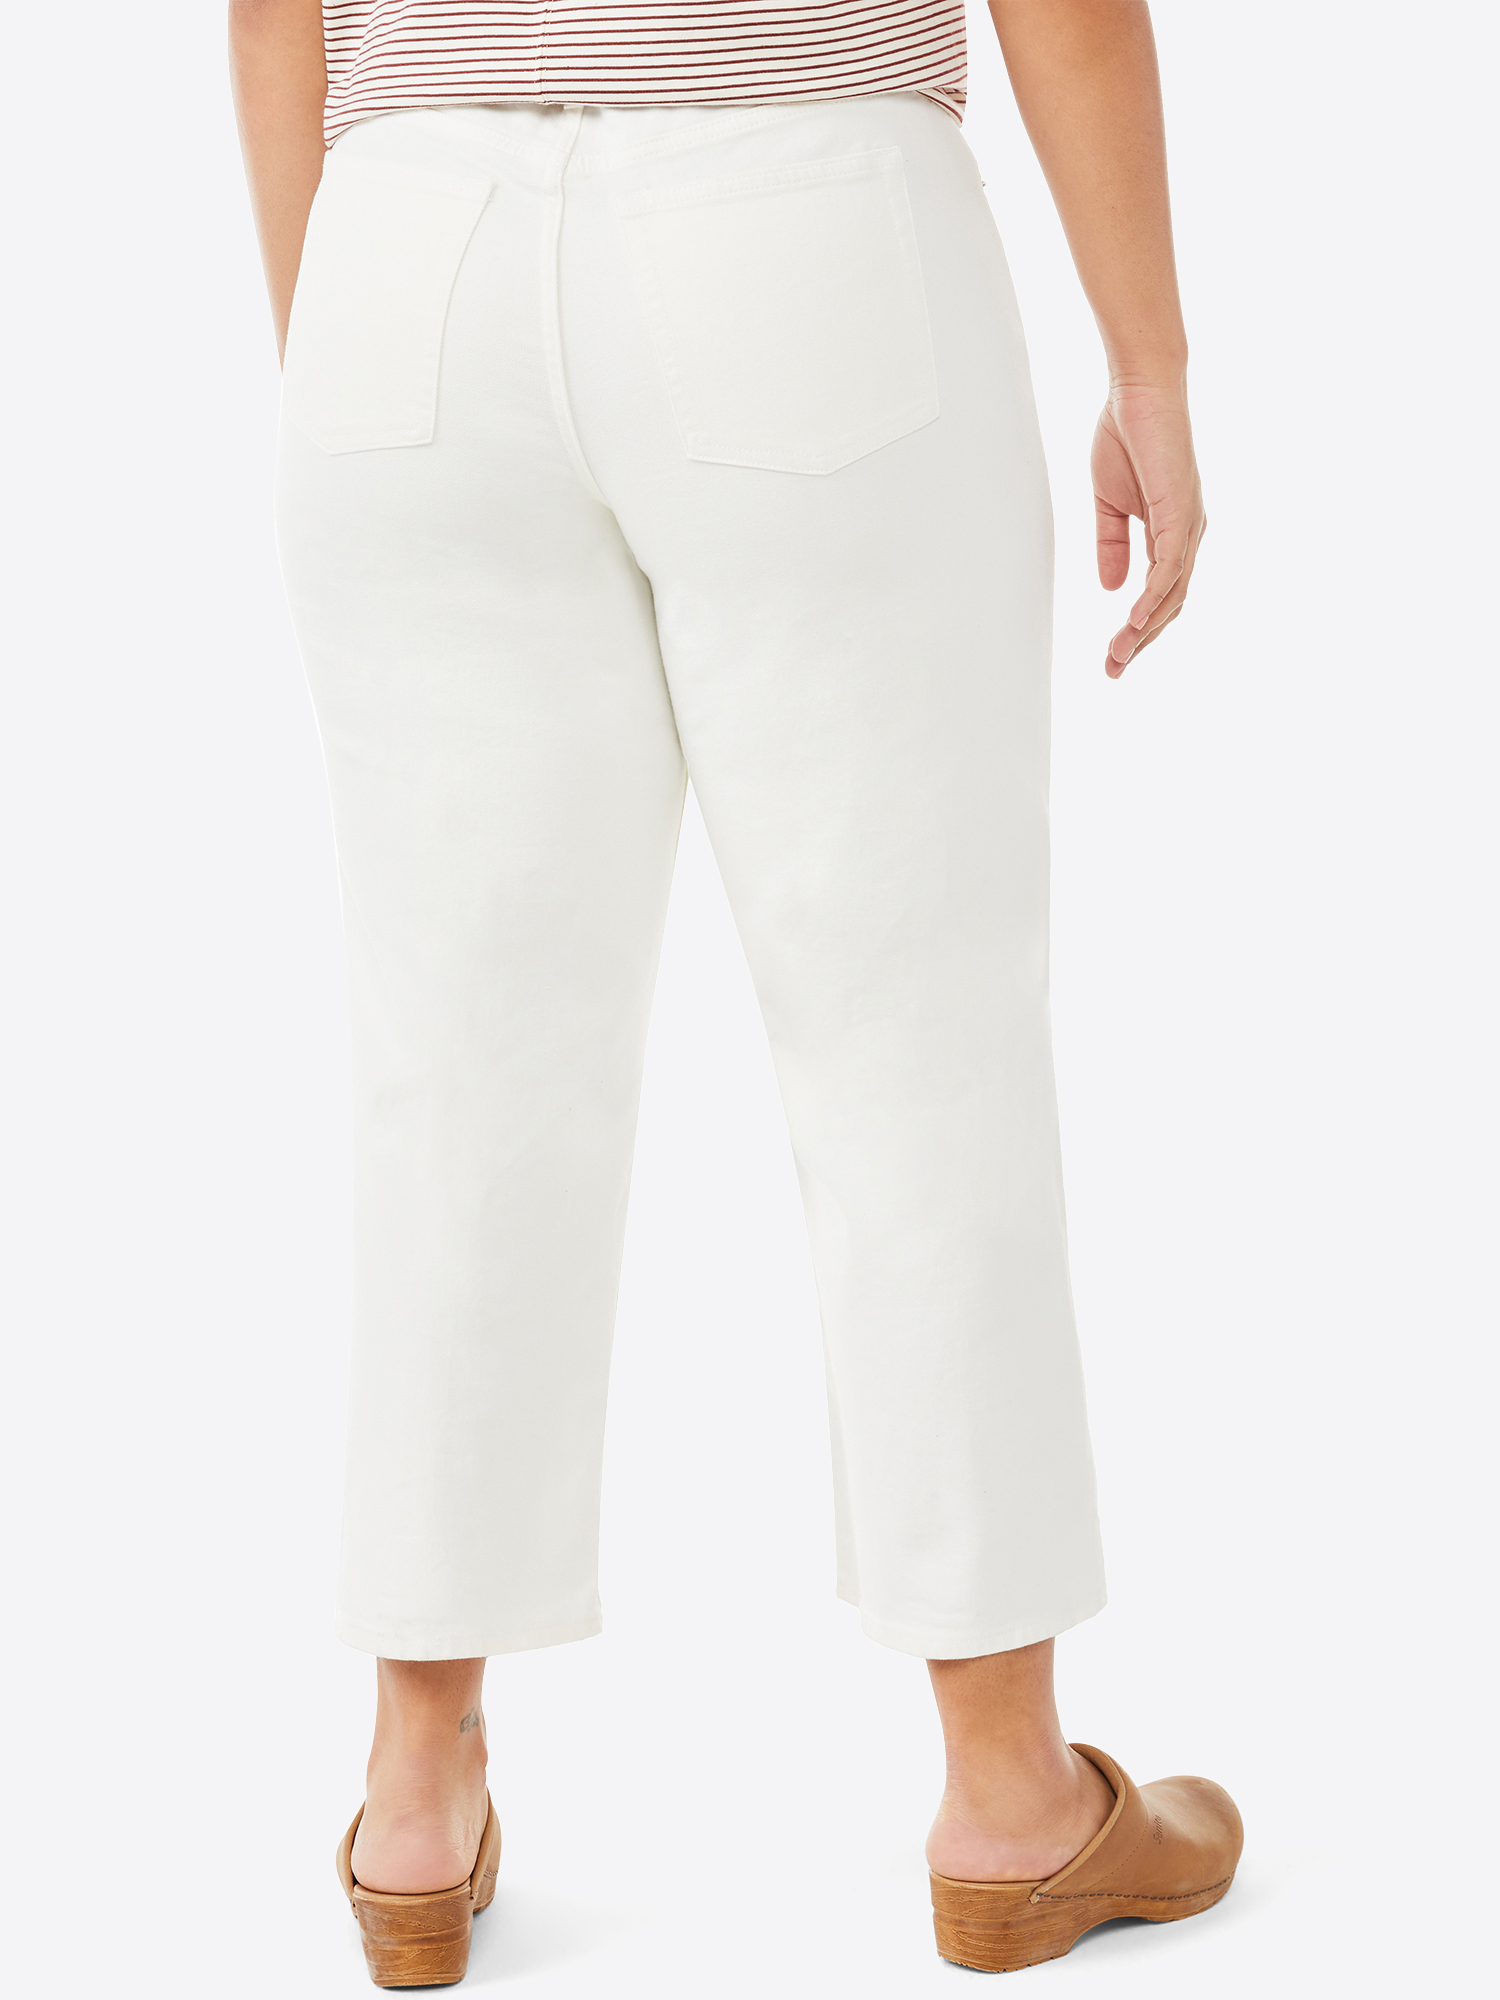 Free Assembly Women's Cropped Wide Straight Jeans - image 2 of 7